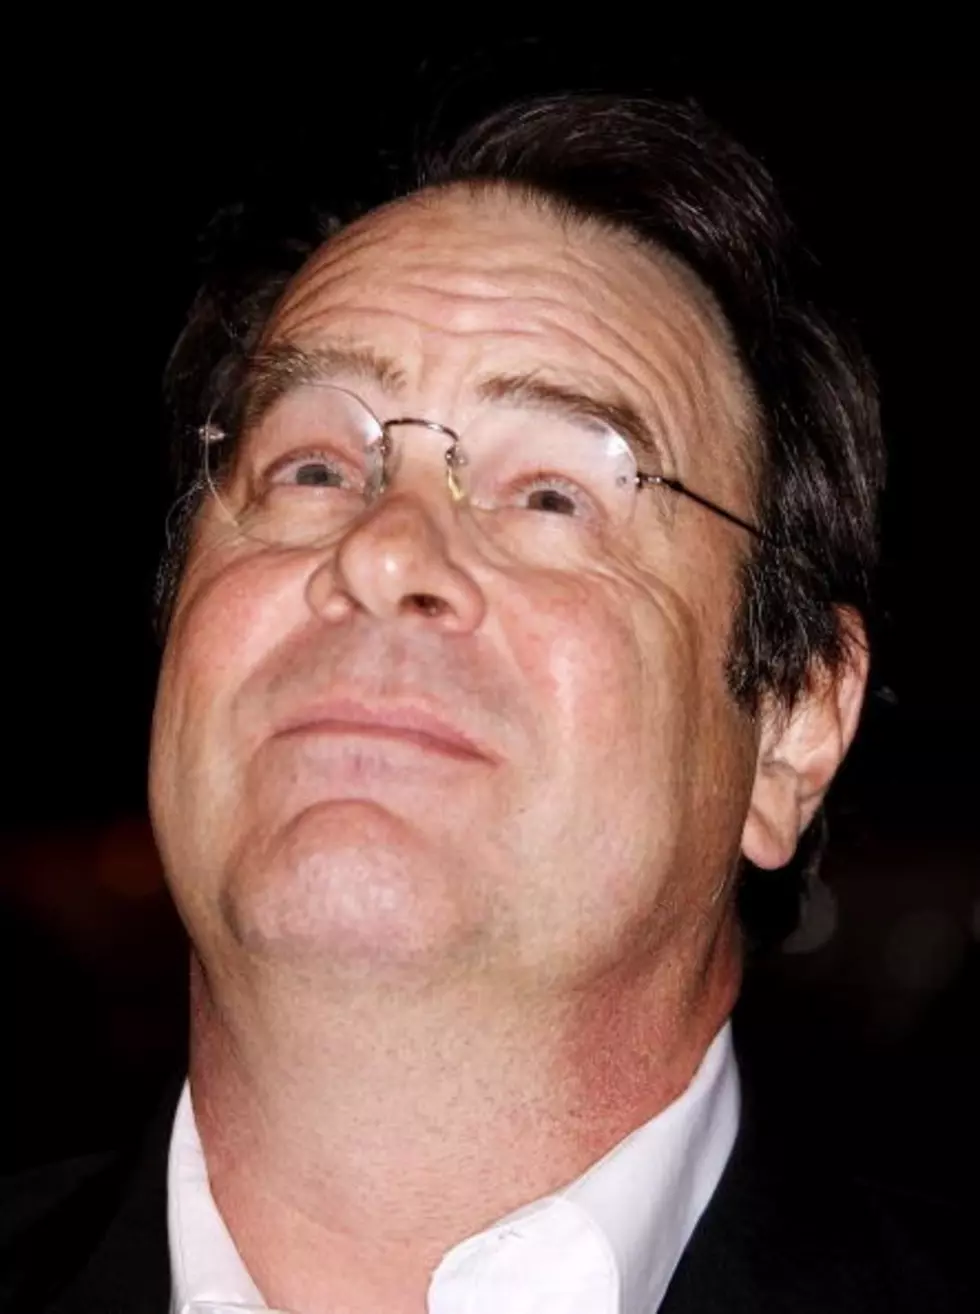 Dan Aykroyd &#8220;Aliens Are Among Us and They Want Our Women&#8221;